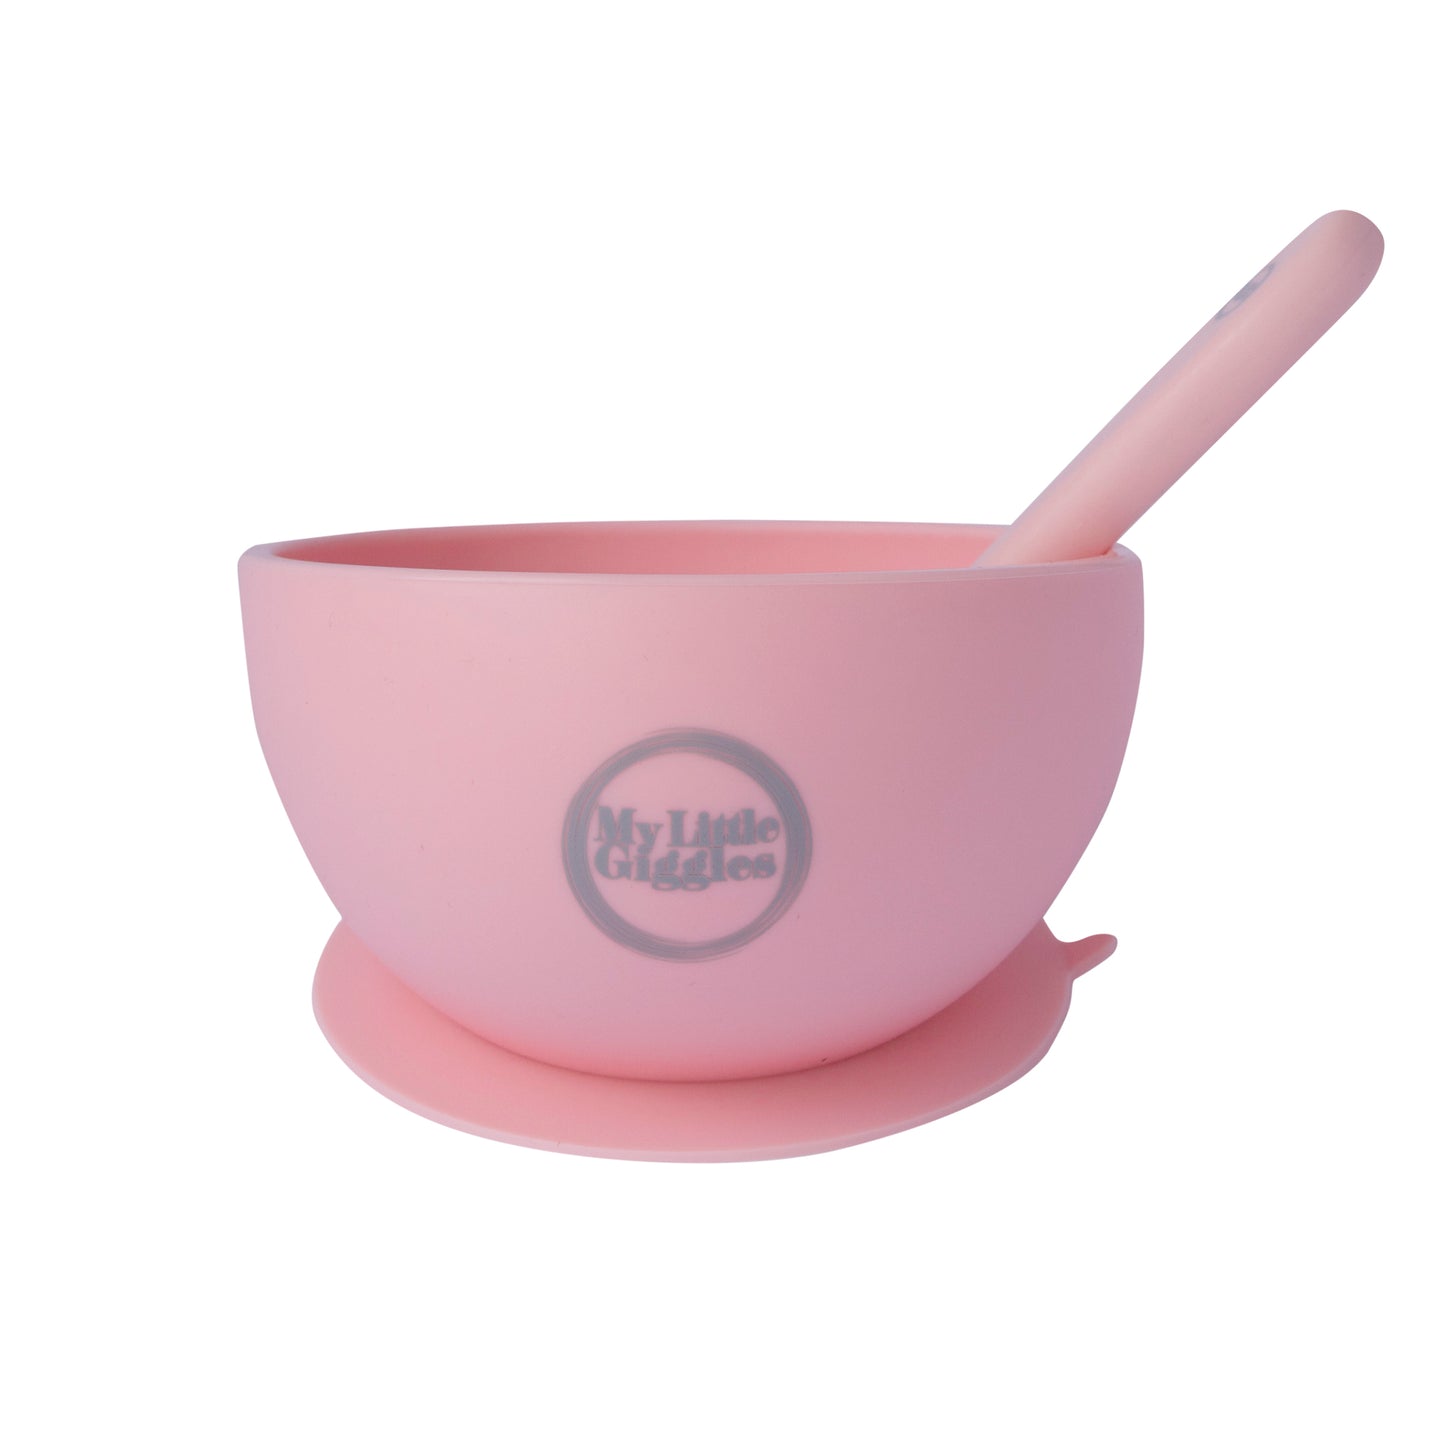 My Little Bowl and Spoon Set - Blush Pink